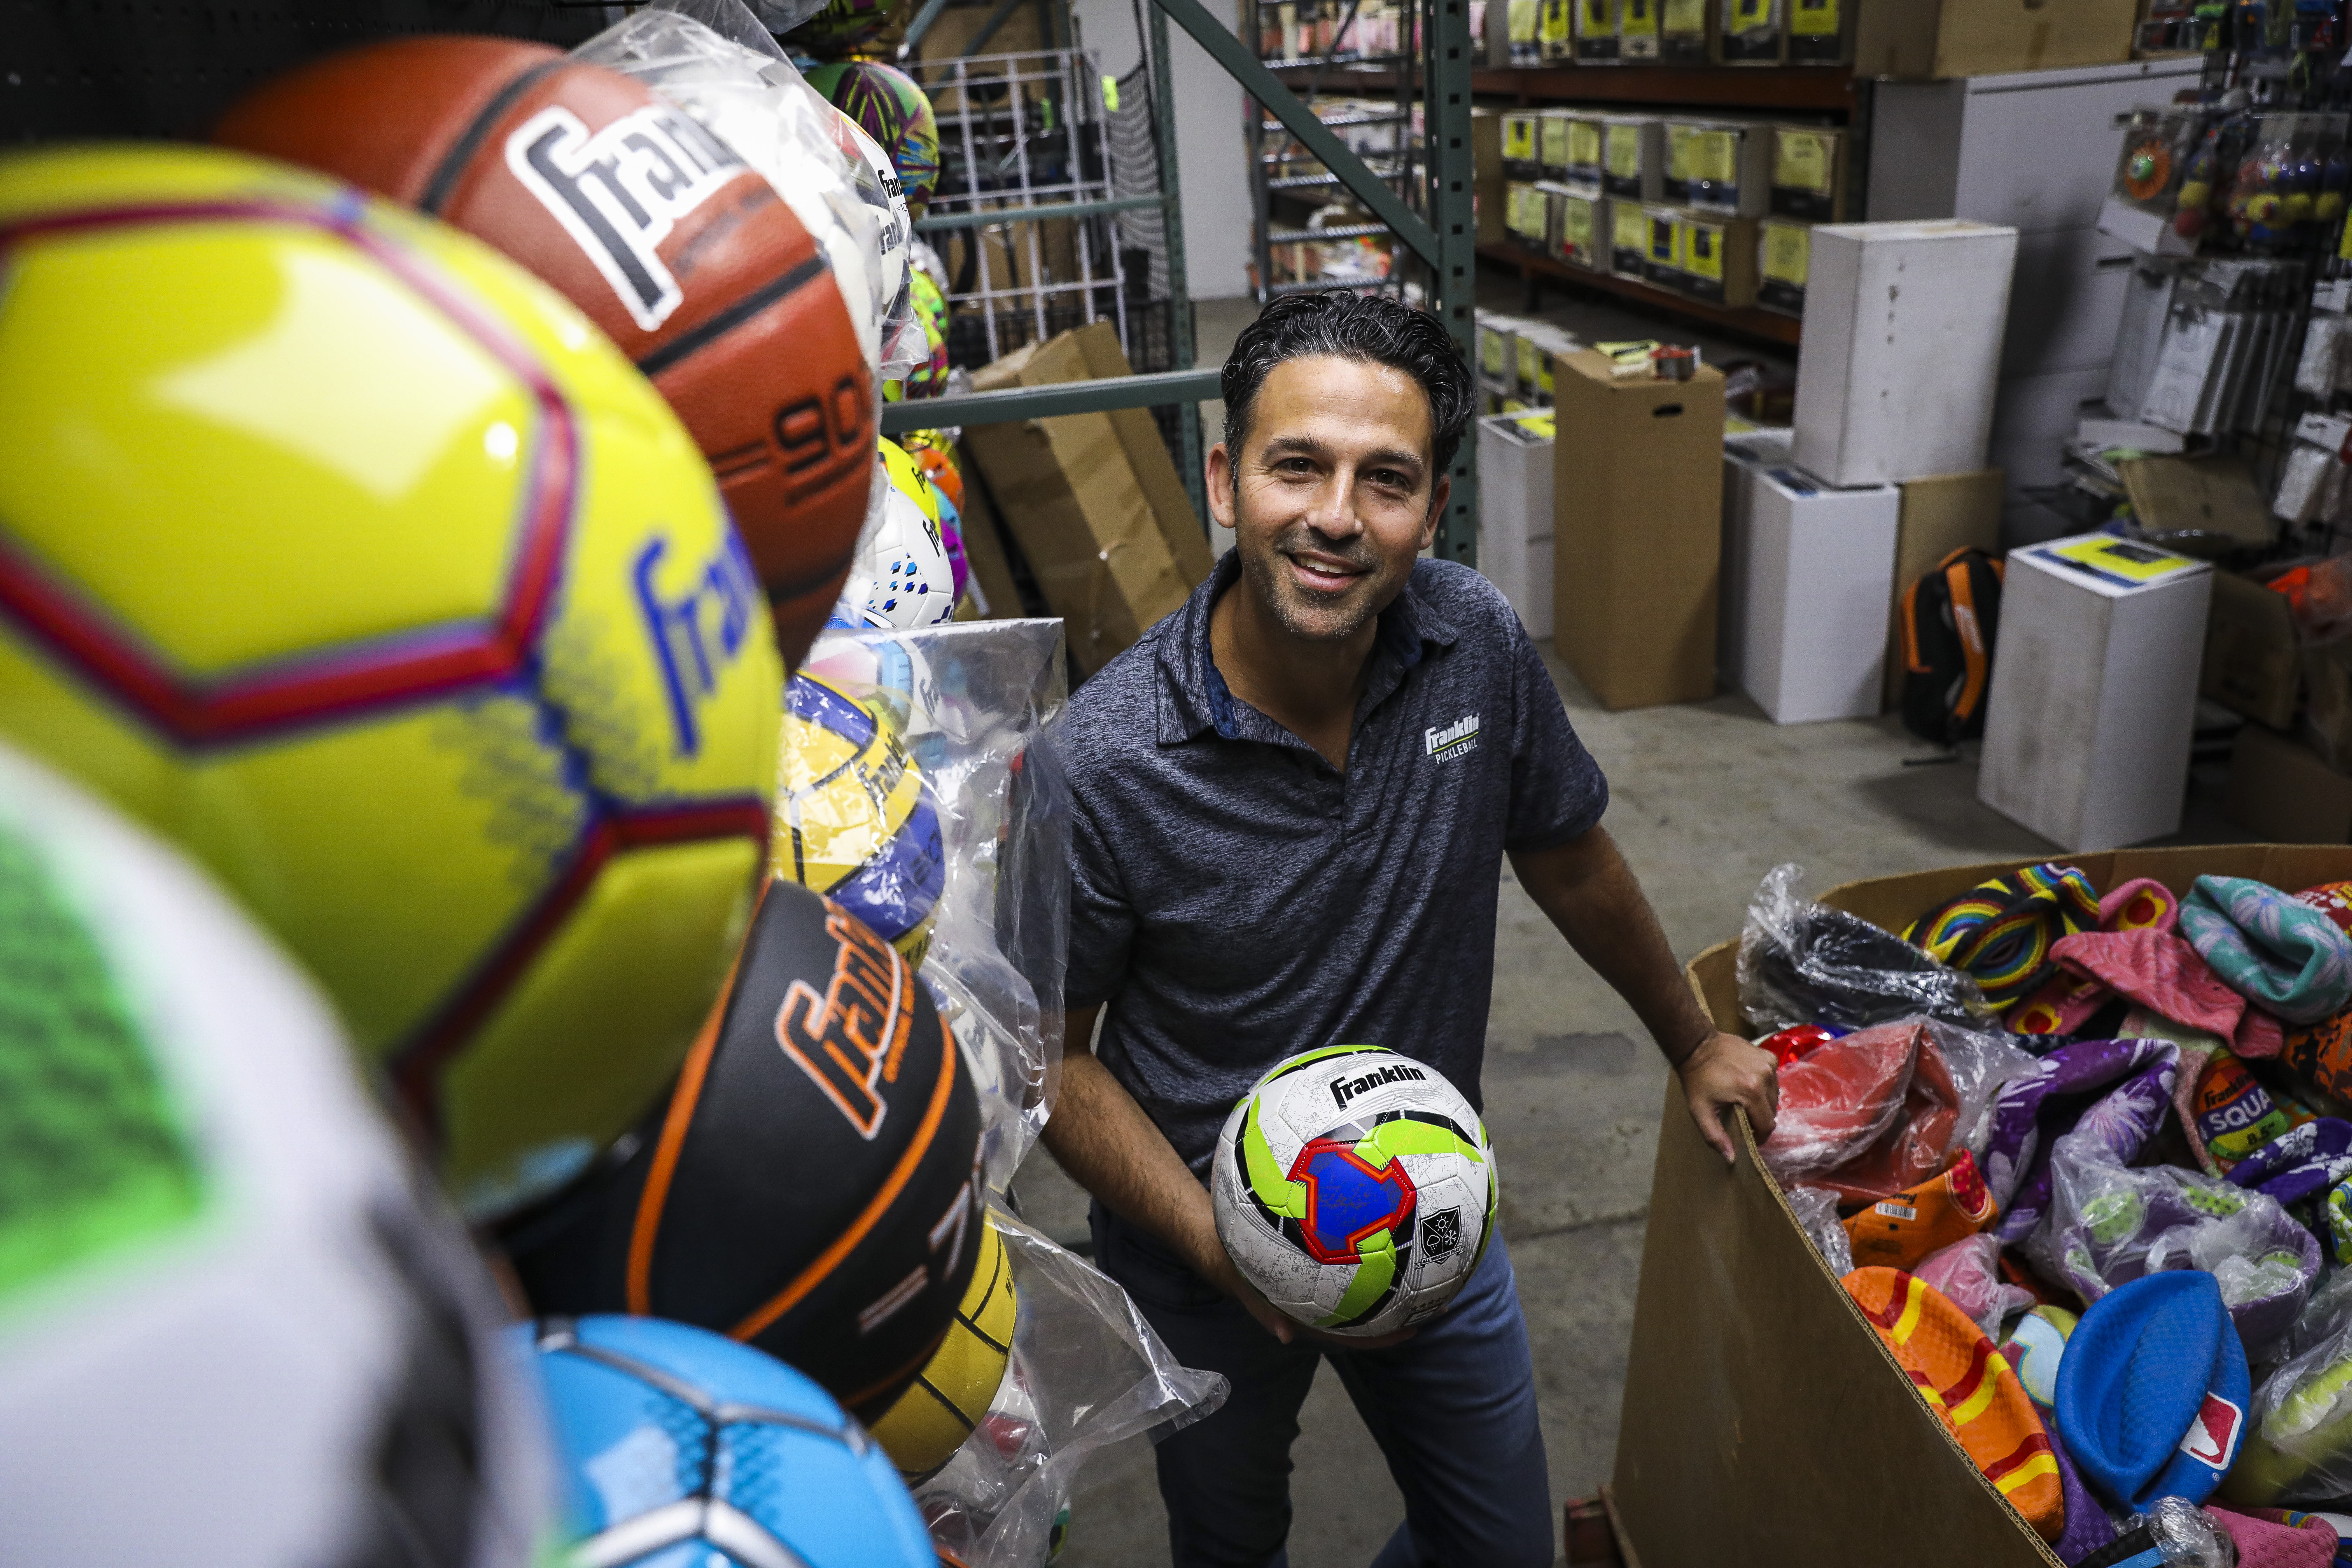 In the suburbs of Boston, family-run Franklin Sports keeps growing